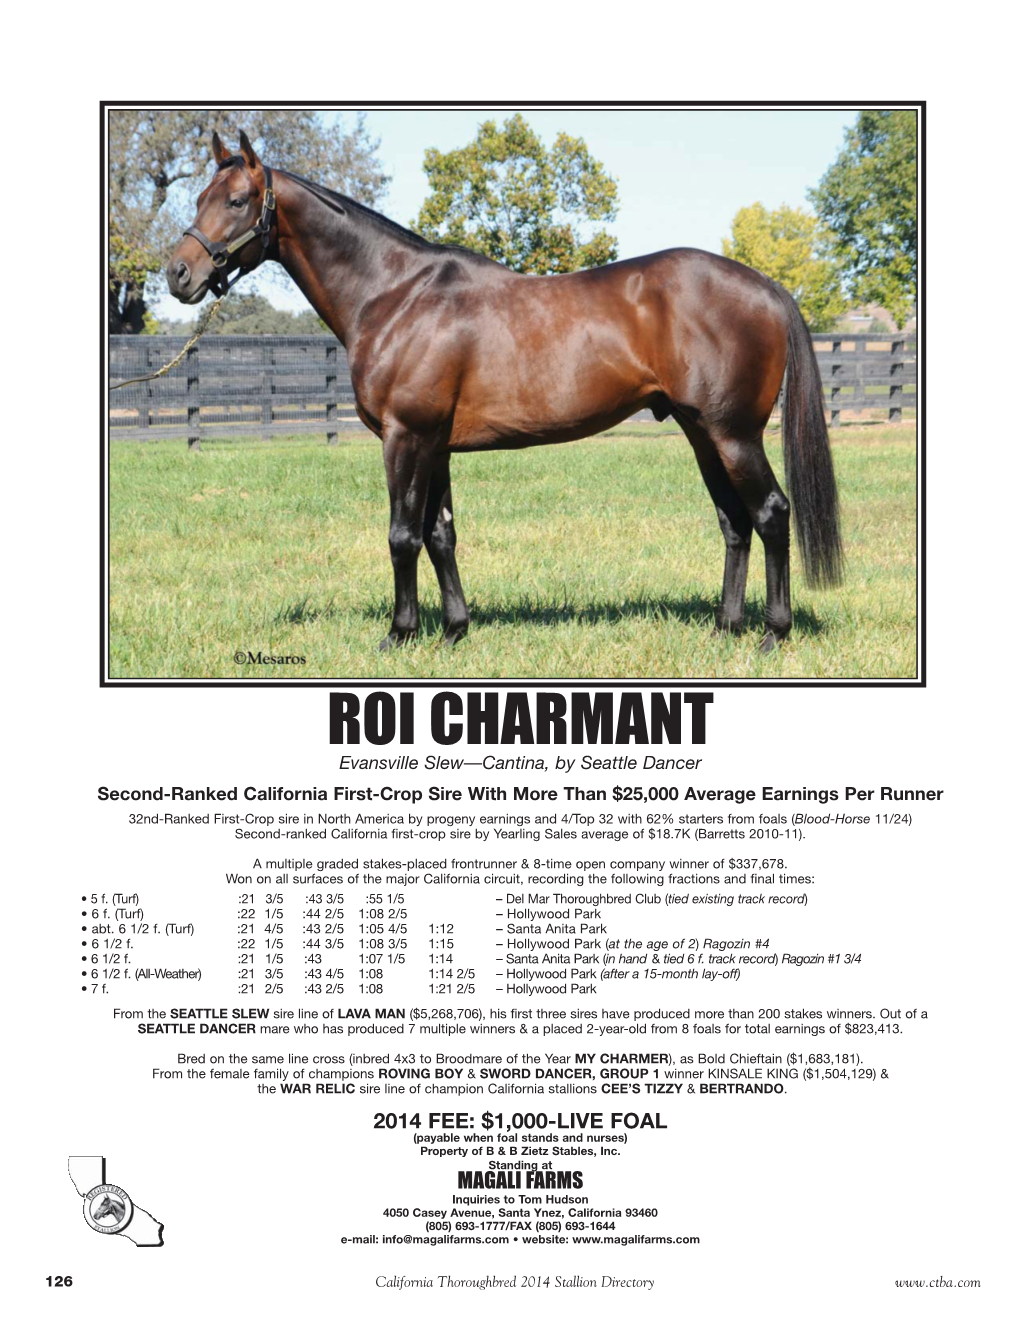 ROI CHARMANT:Layout 1 11/27/13 2:23 PM Page 1